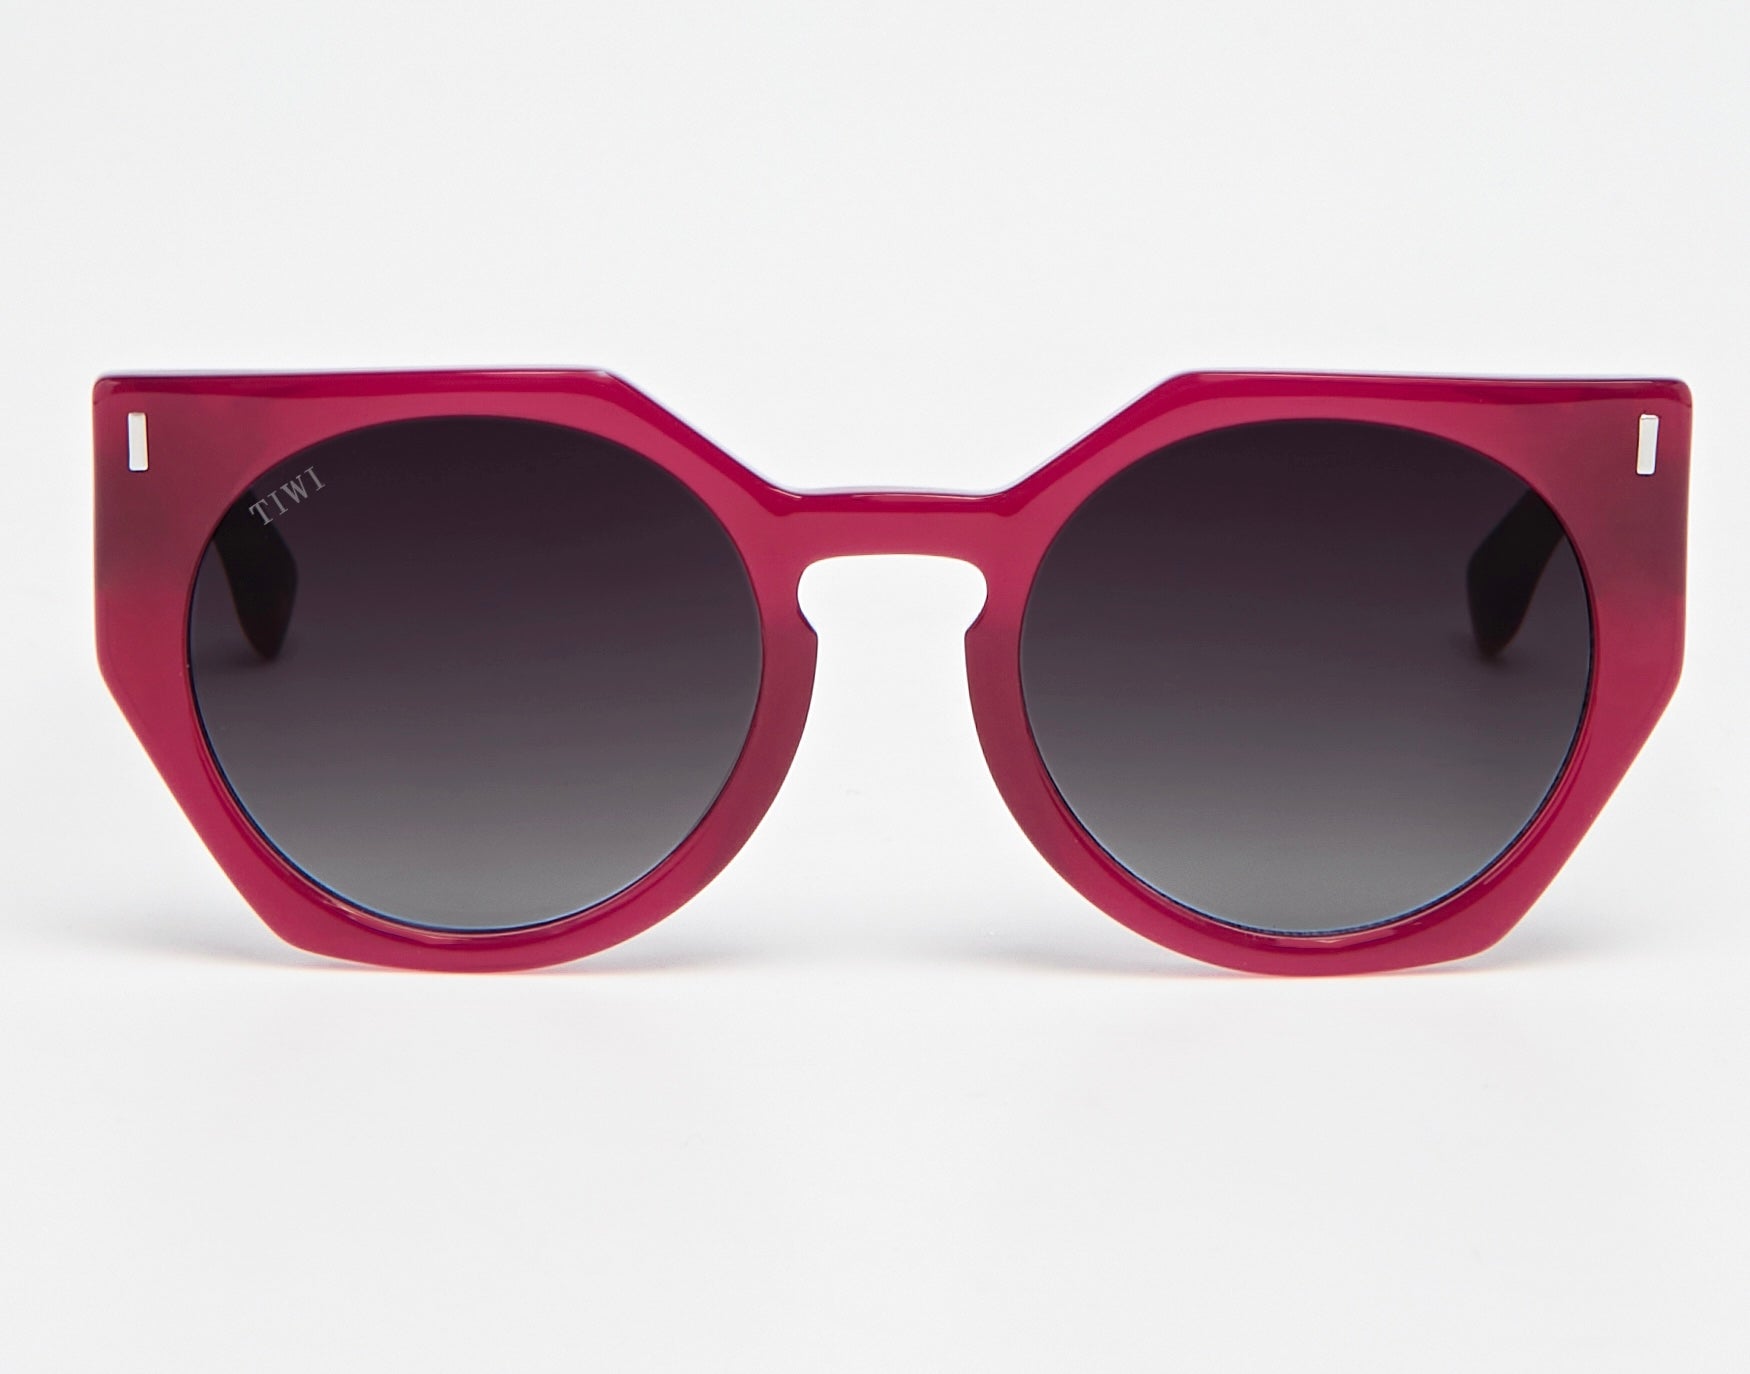 VENUS Sunglasses Available in more colors Shiny Cherry with Tortoise Temples  